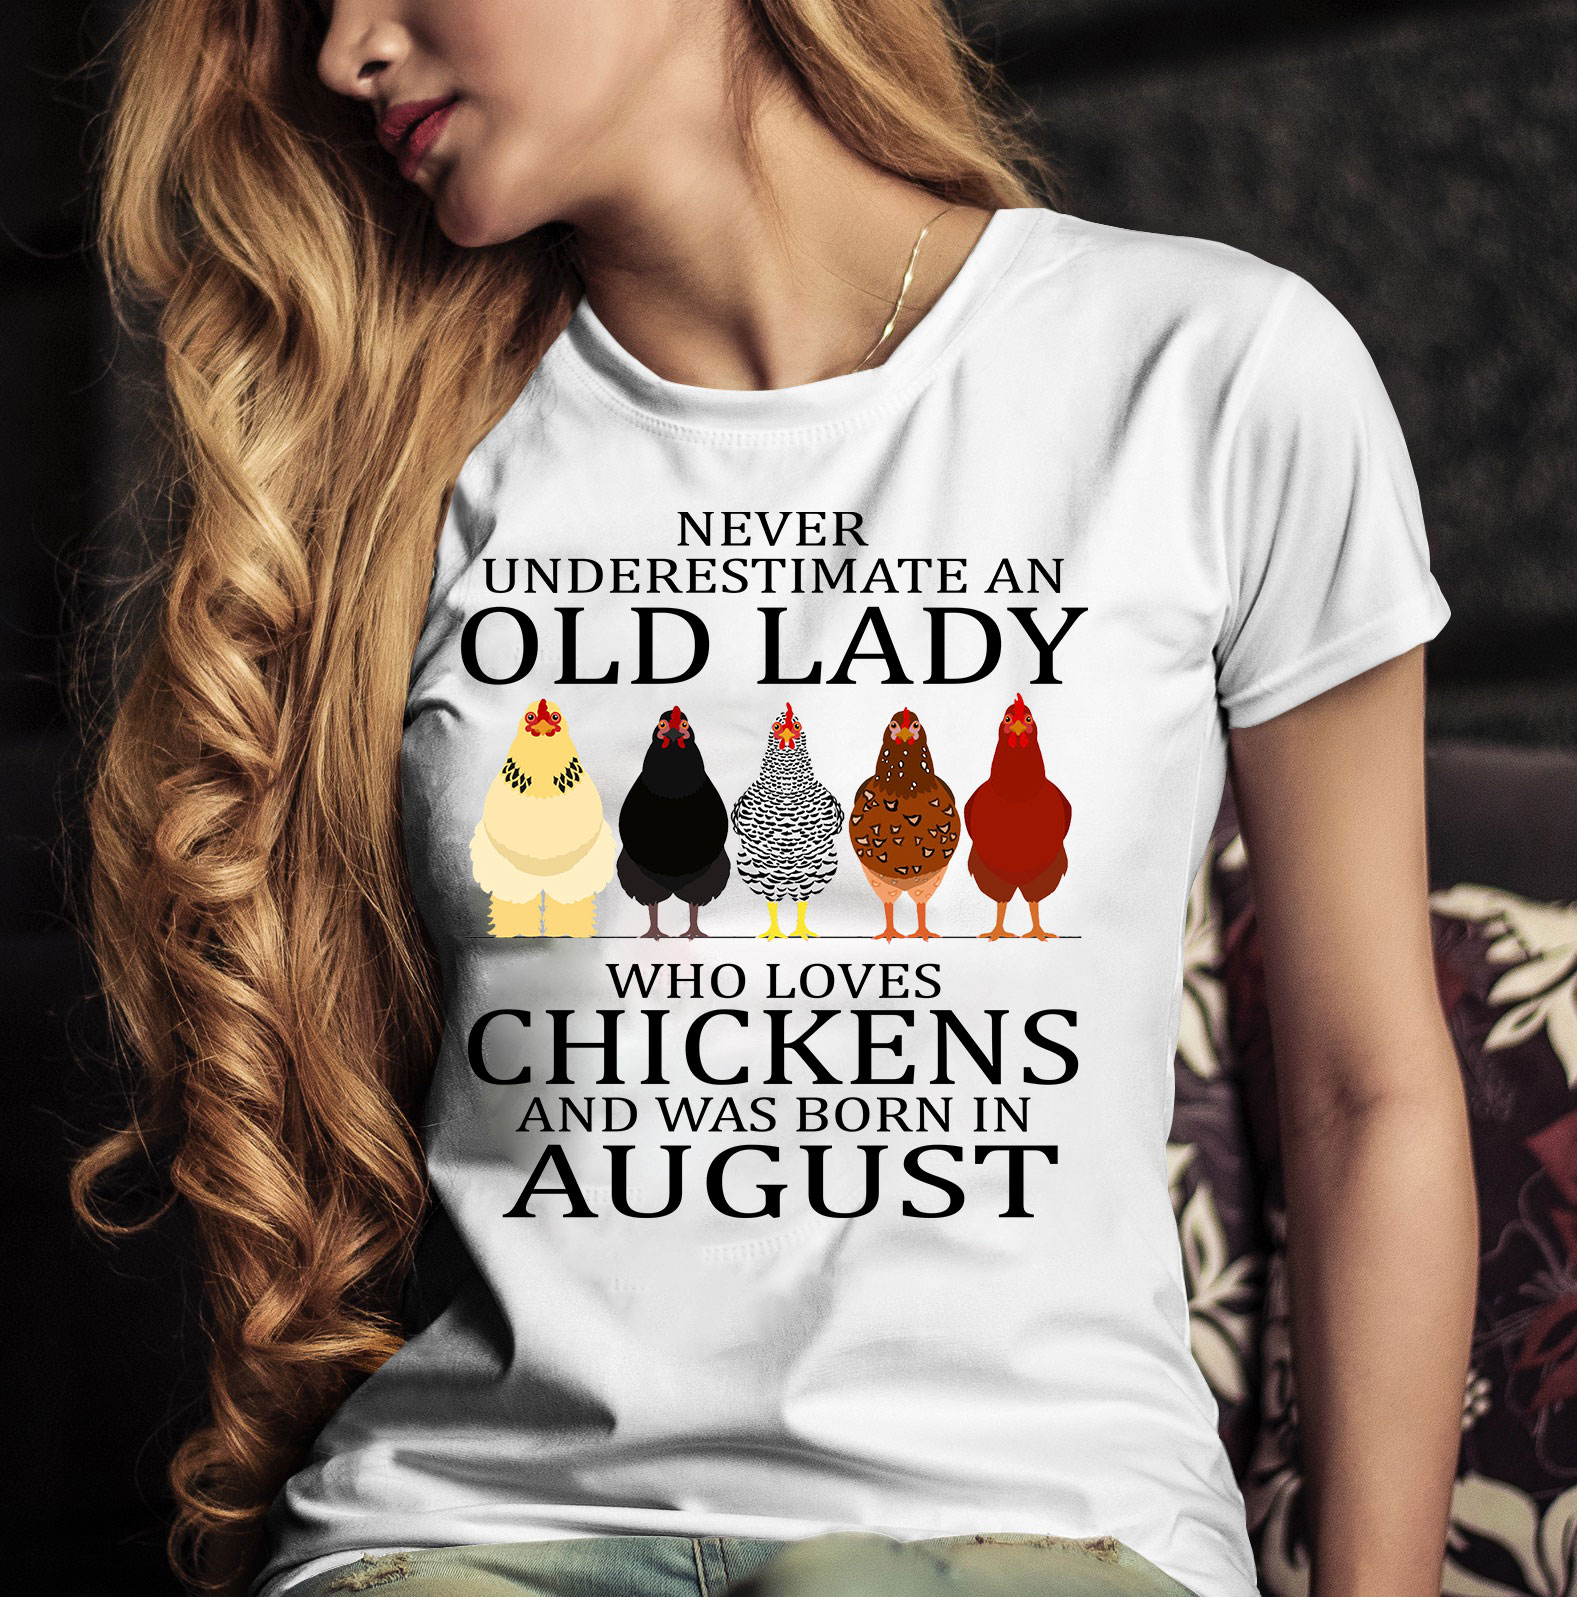 Never underestimate an old lady who loves chickens and was born in August